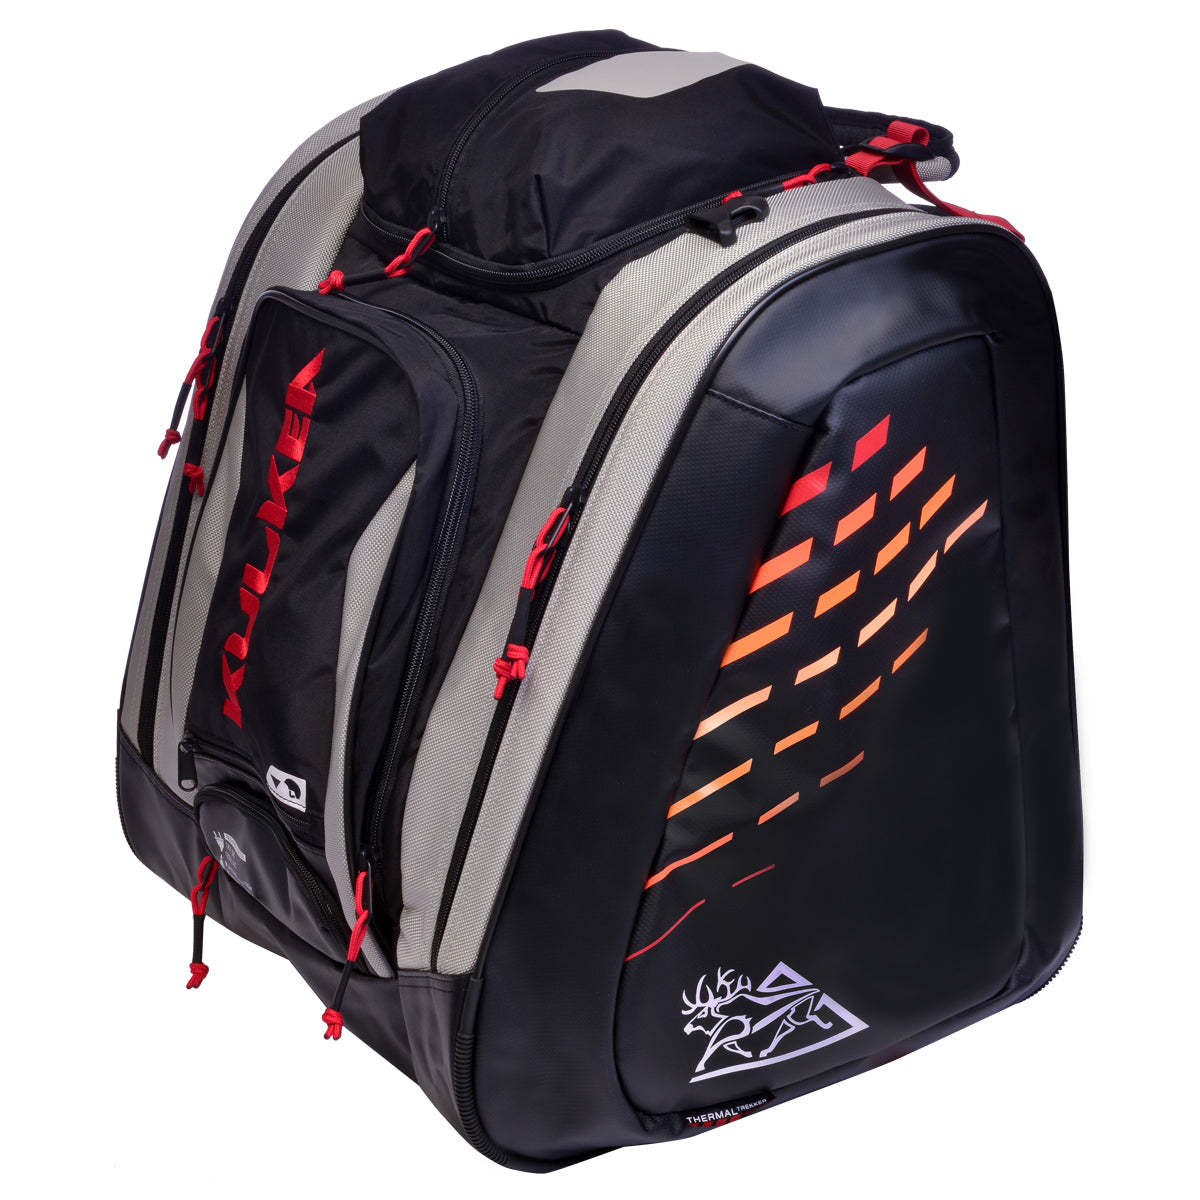 Kulkea heated ski boot bag, black with grey and red accents. Shoulder straps and plenty of zippered compartments.